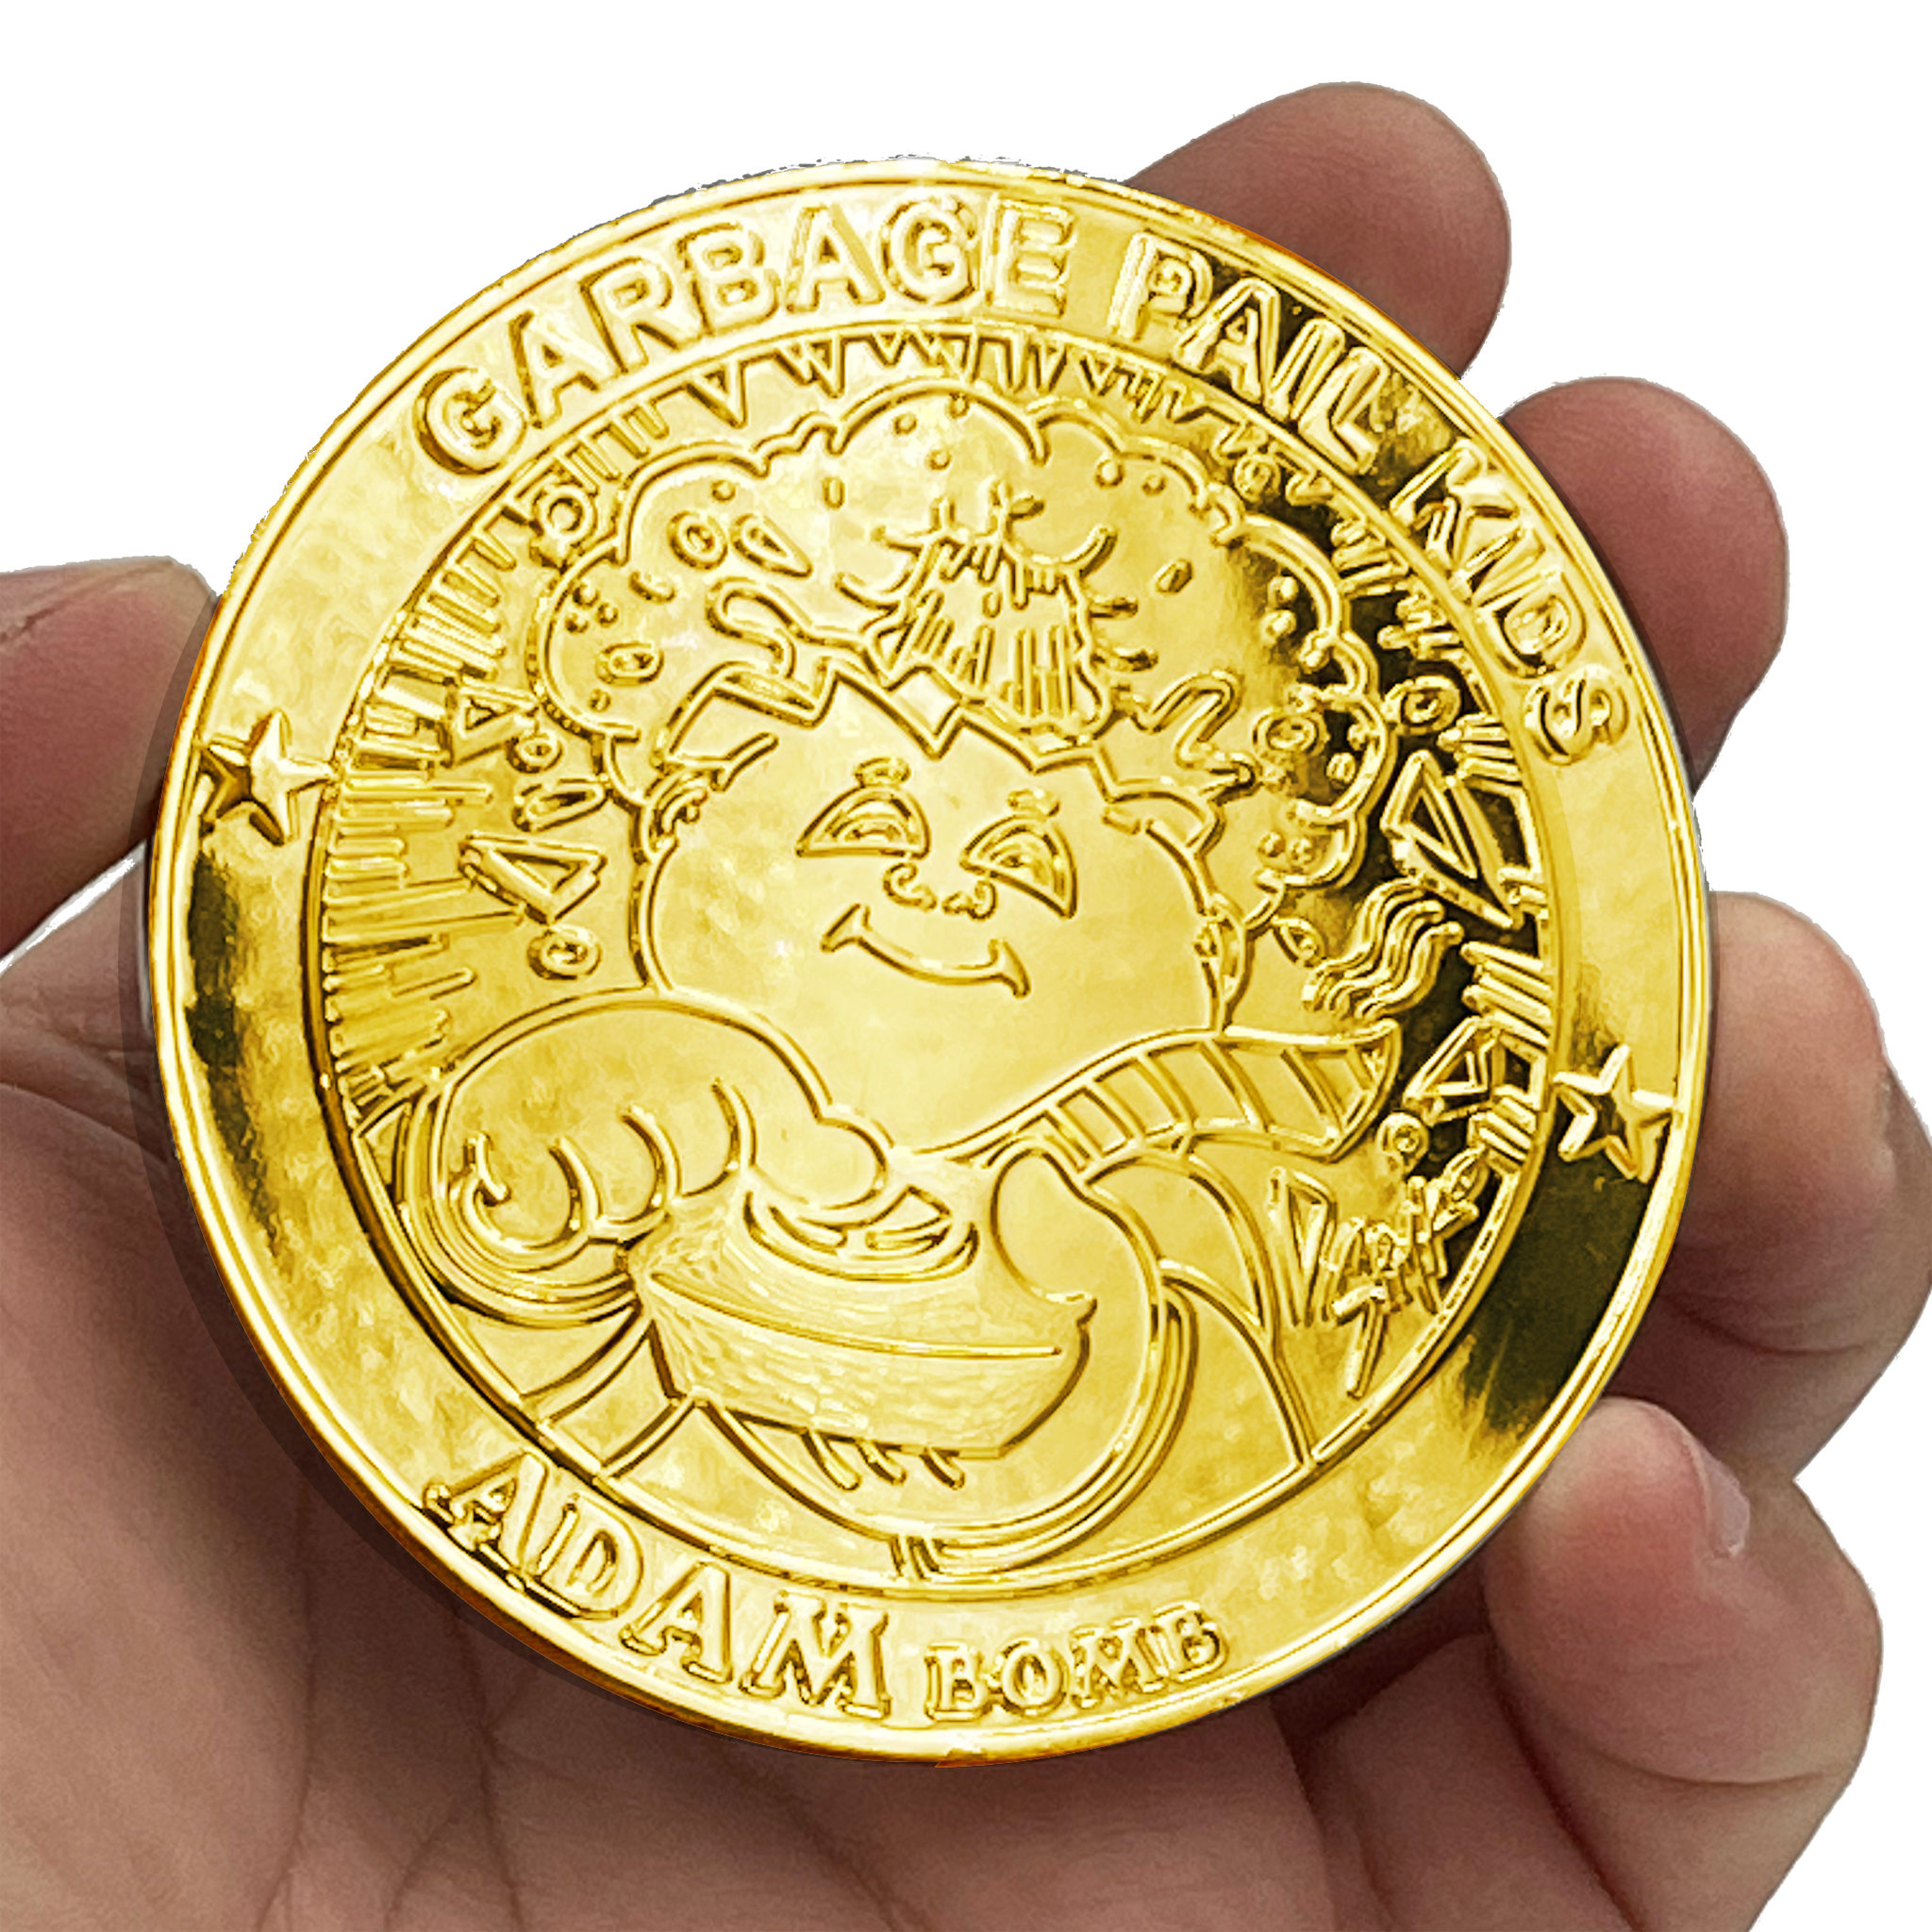 24 KT GOLD Plated Variation 3 inch SIMKO Topps Officially Licensed Adam Bomb GPK Challenge Coin Garbage Pail Kids